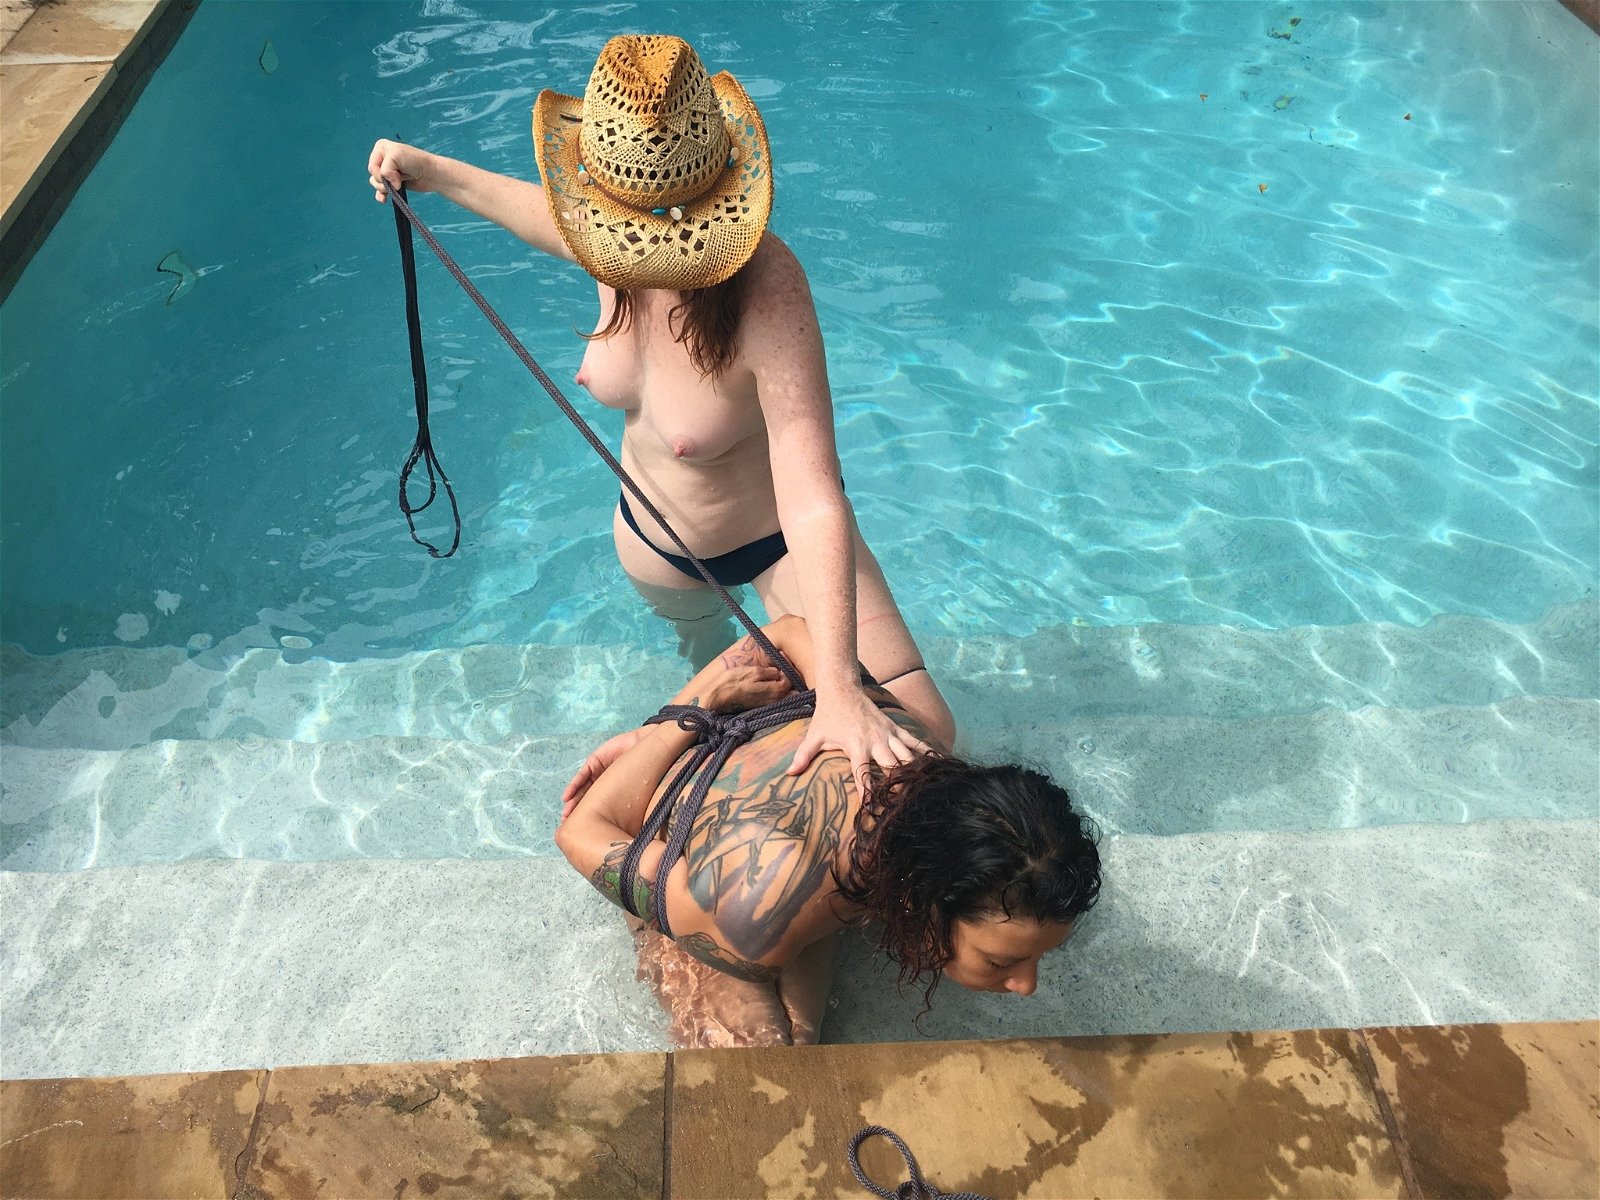 Photo by KinkyLotus with the username @KinkyLotus, who is a star user,  December 6, 2018 at 1:47 AM. The post is about the topic Wet and the text says 'KinkyLotus tying Ms. YET by the pool
Image by Traci Matlock'